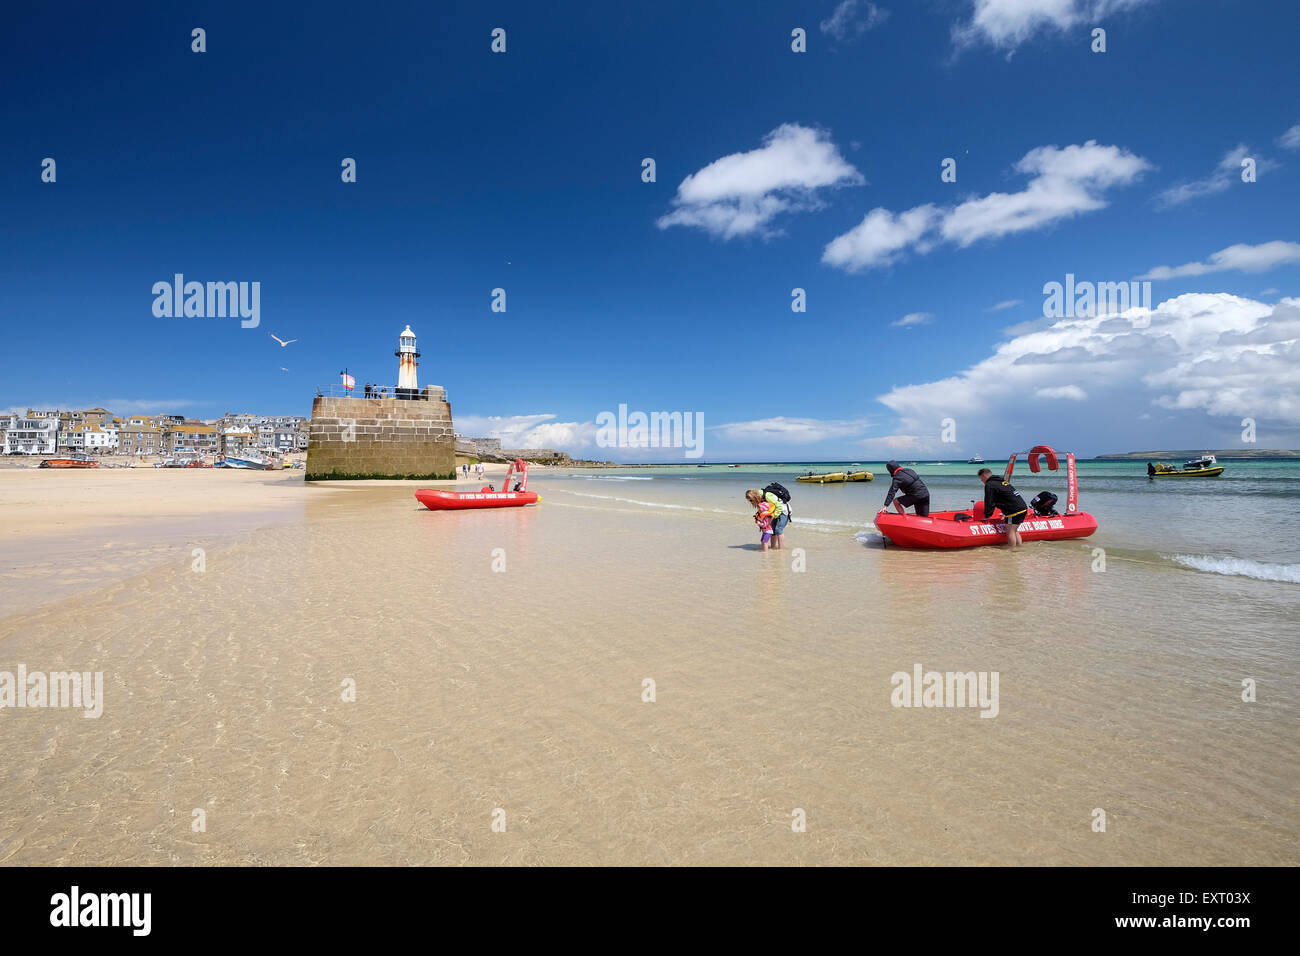 St Ives, Cornwall, UK: Family getting out of a red self-drive hire boat in the shallow water of the harbour beach on sunny day. Stock Photo